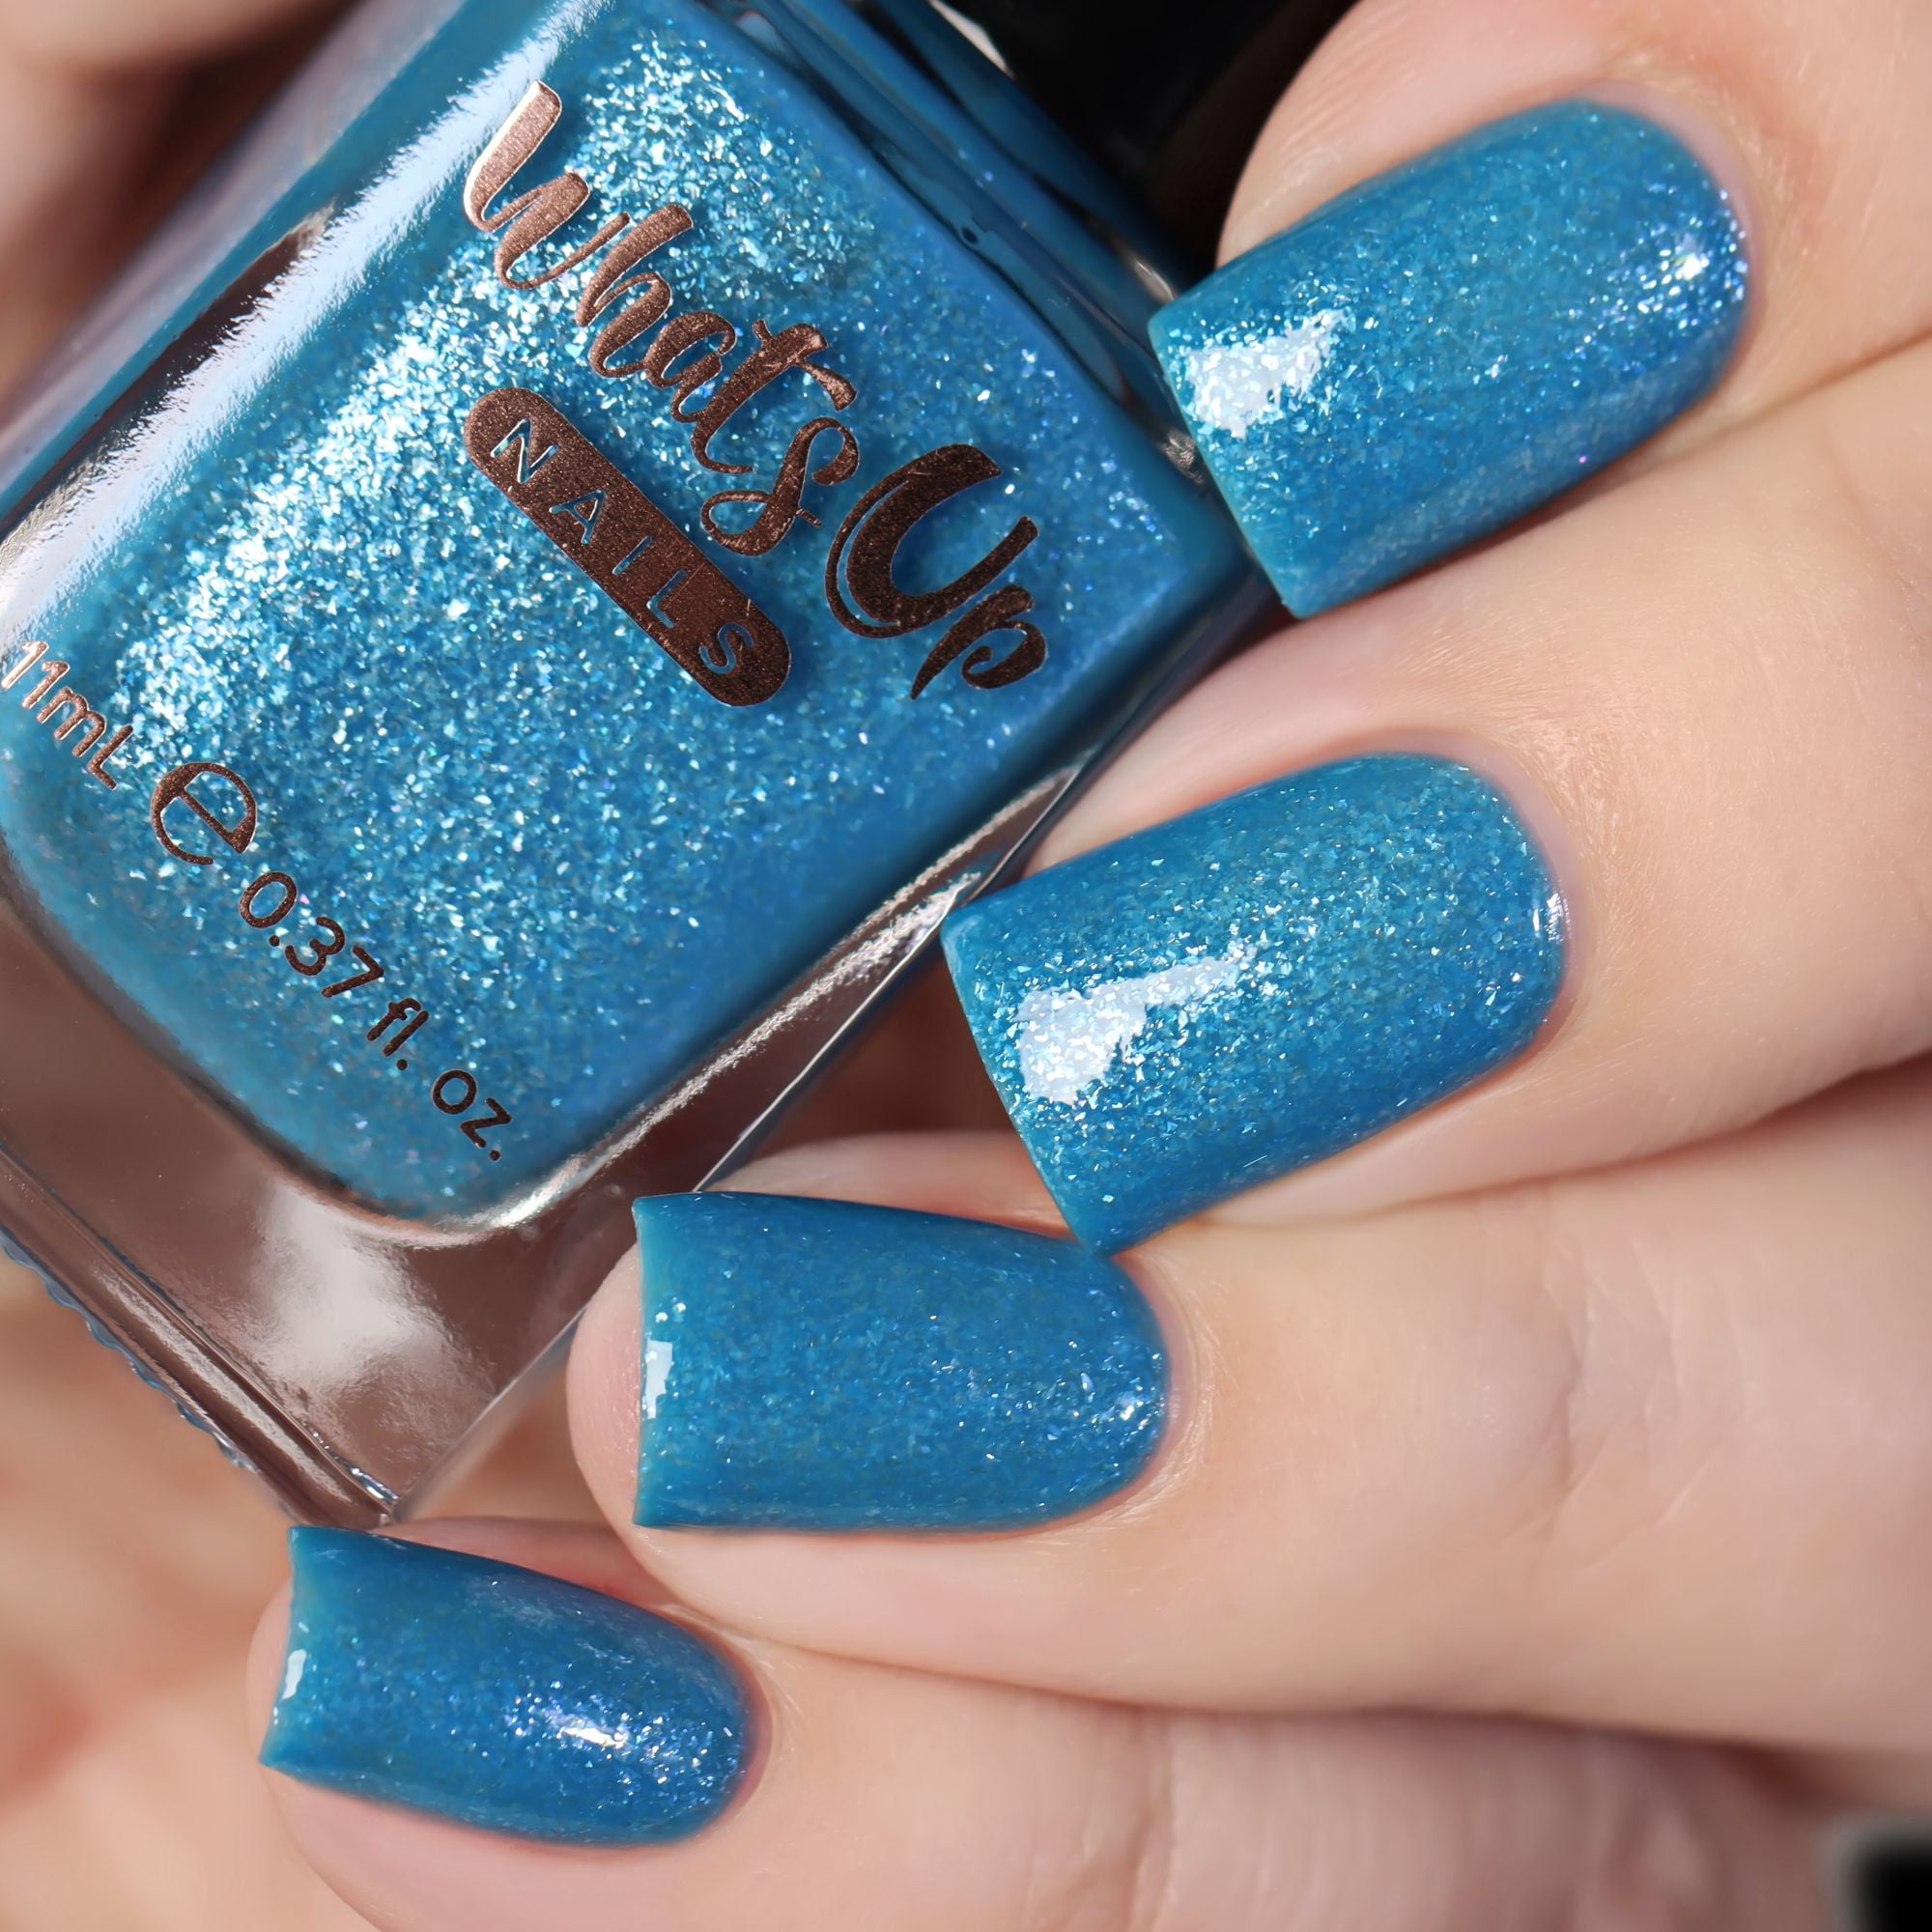 Boozy and Bright – Luxie Nail